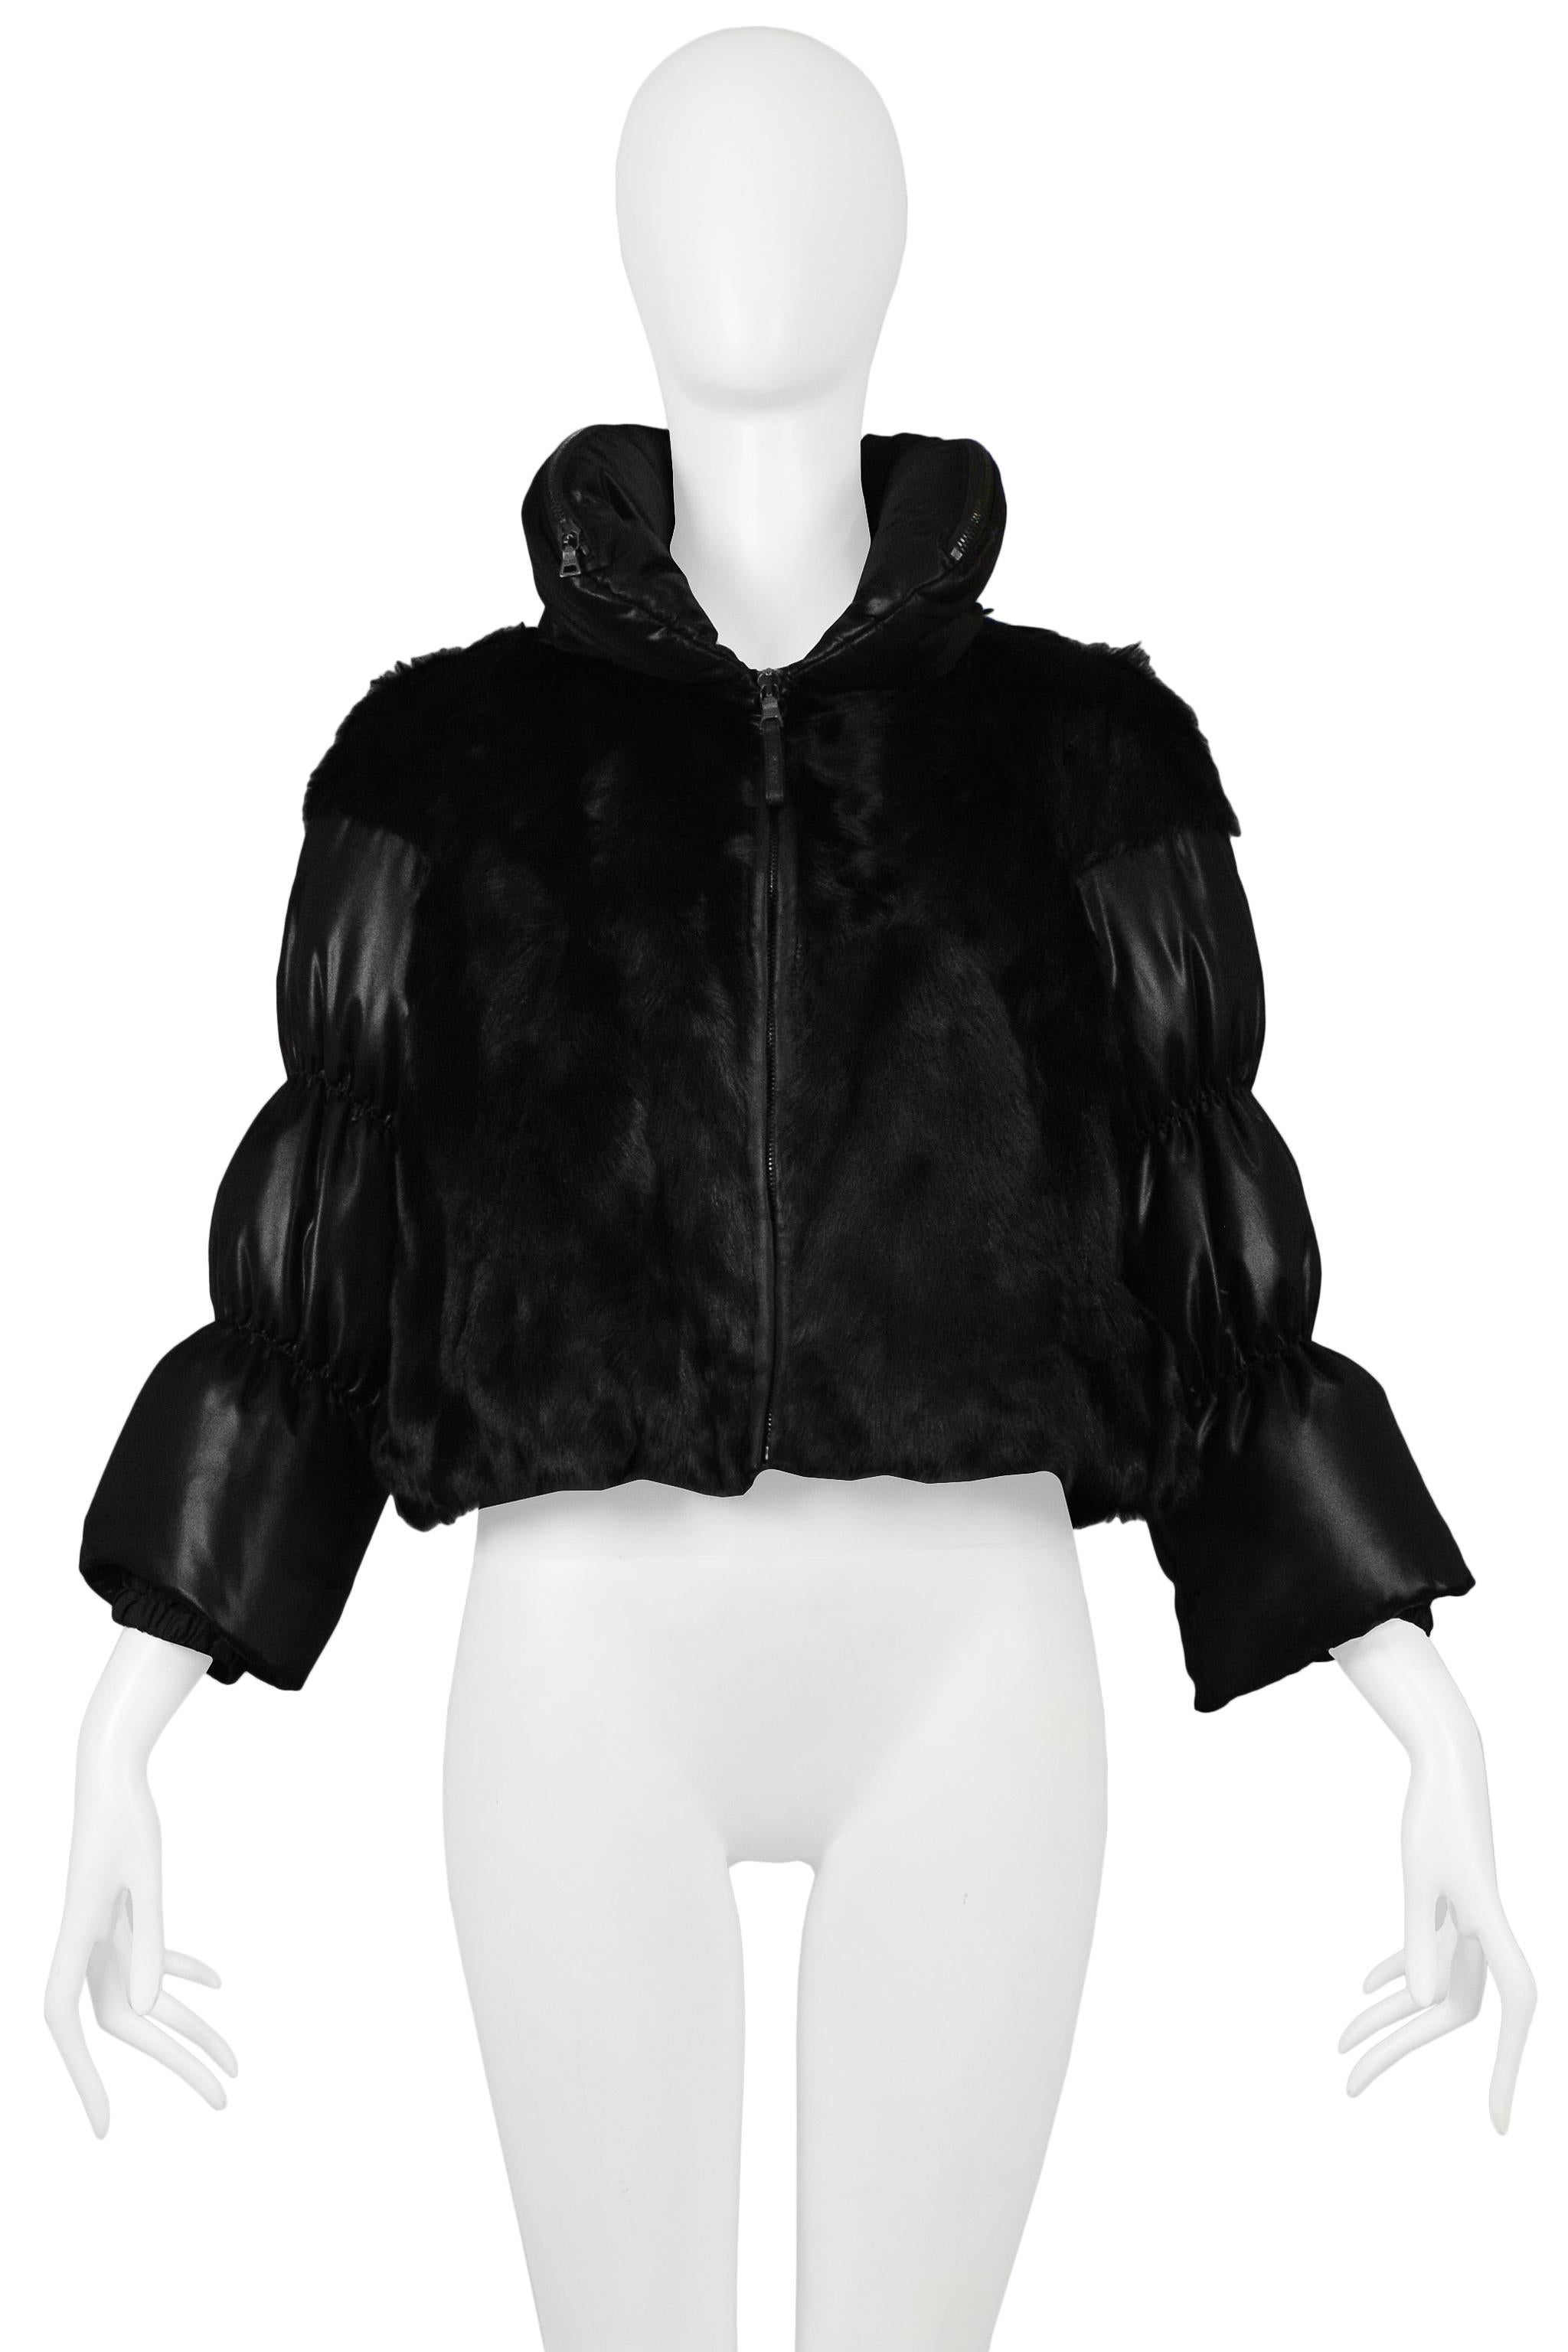 Resurrection Vintage is excited to offer a vintage Prada dyed, black, goat fur cropped jacket featuring 3/4 length sleeves, a high collar with a hidden hood, side slit pockets, and a center front zipper. 

Prada, Italy
Size 42
Goat Fur, Acetate, and